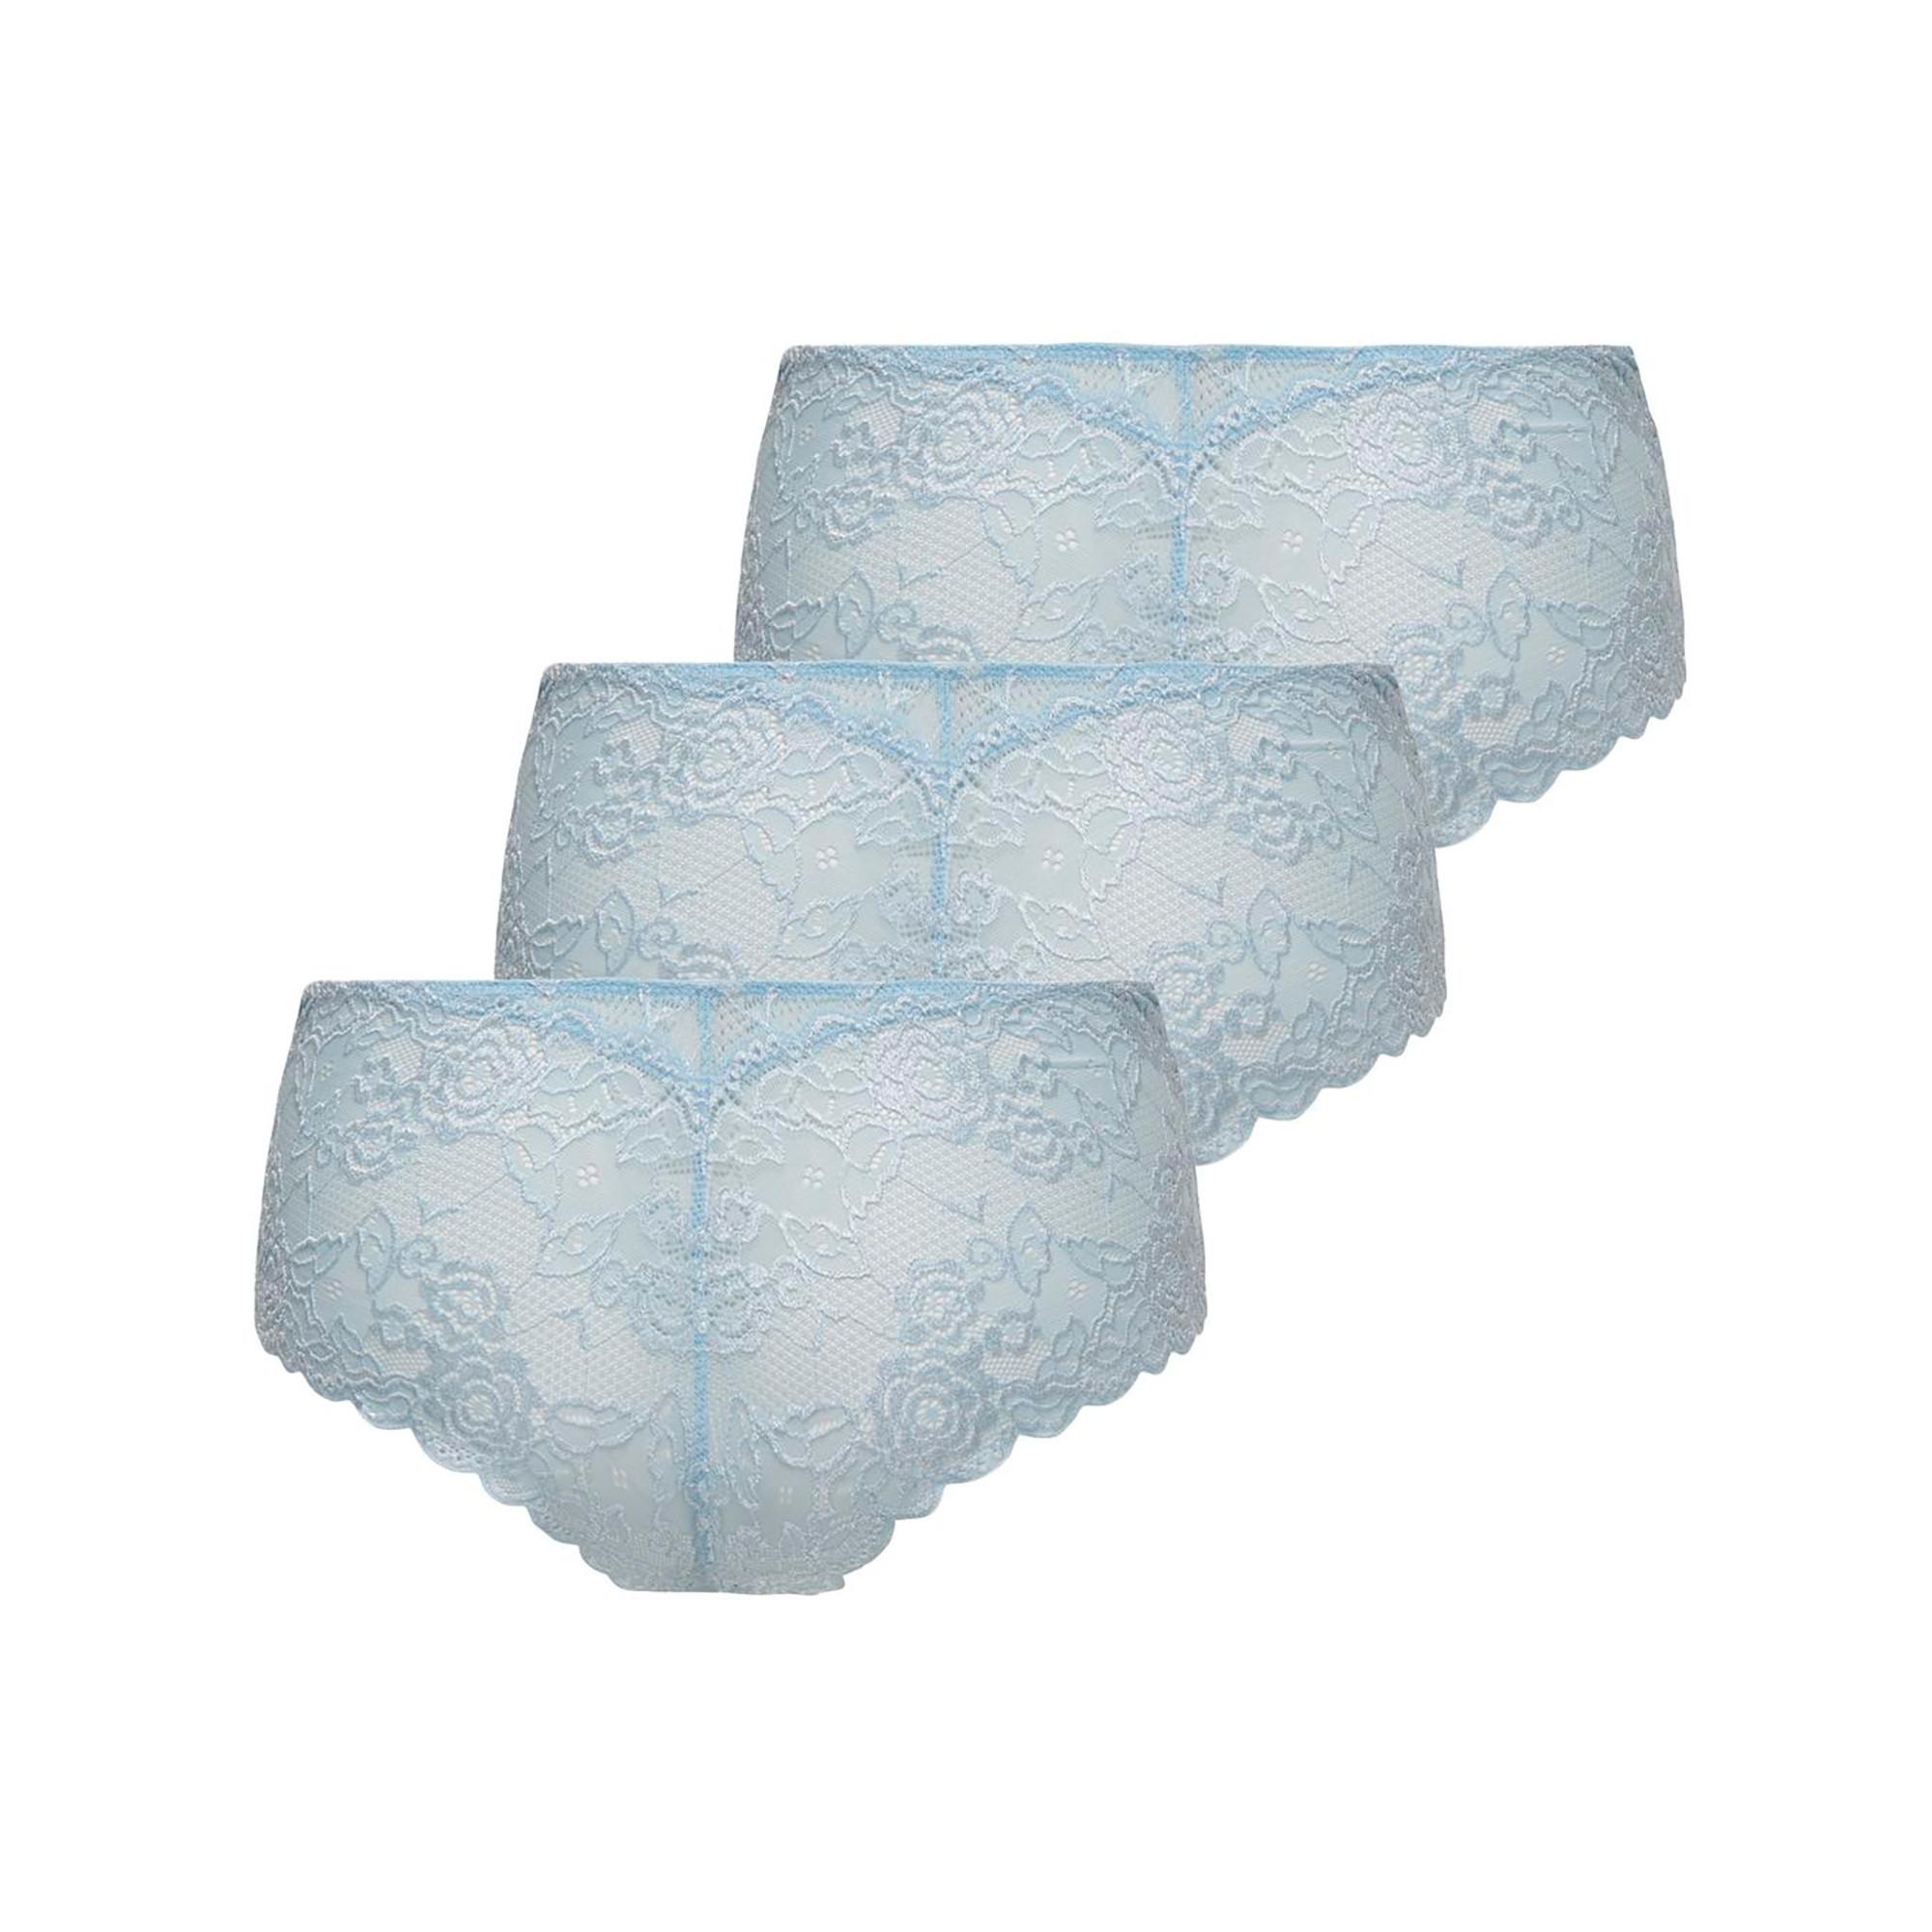 Only Lingerie Jolie lace 3P brief Hipster 